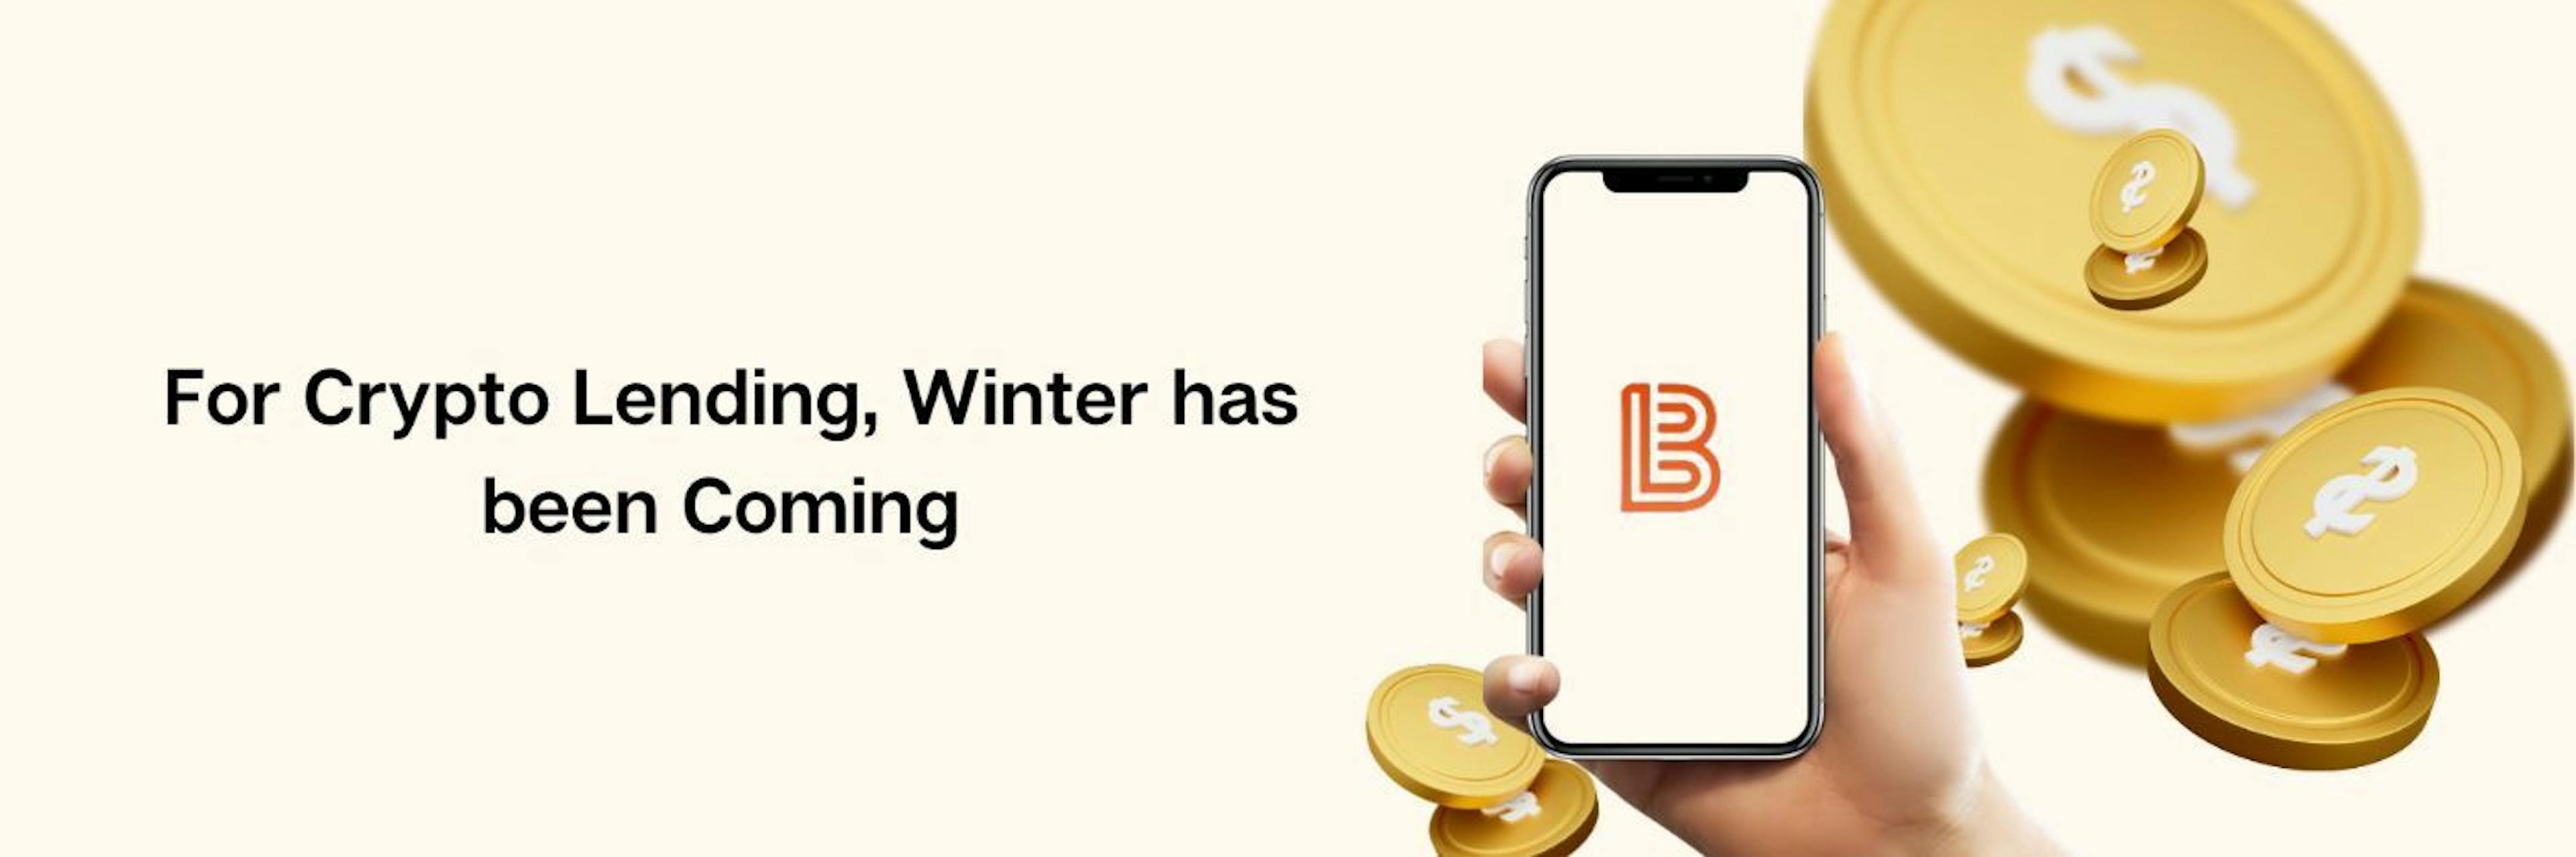 featured image - For Crypto Lending, Winter has been Coming